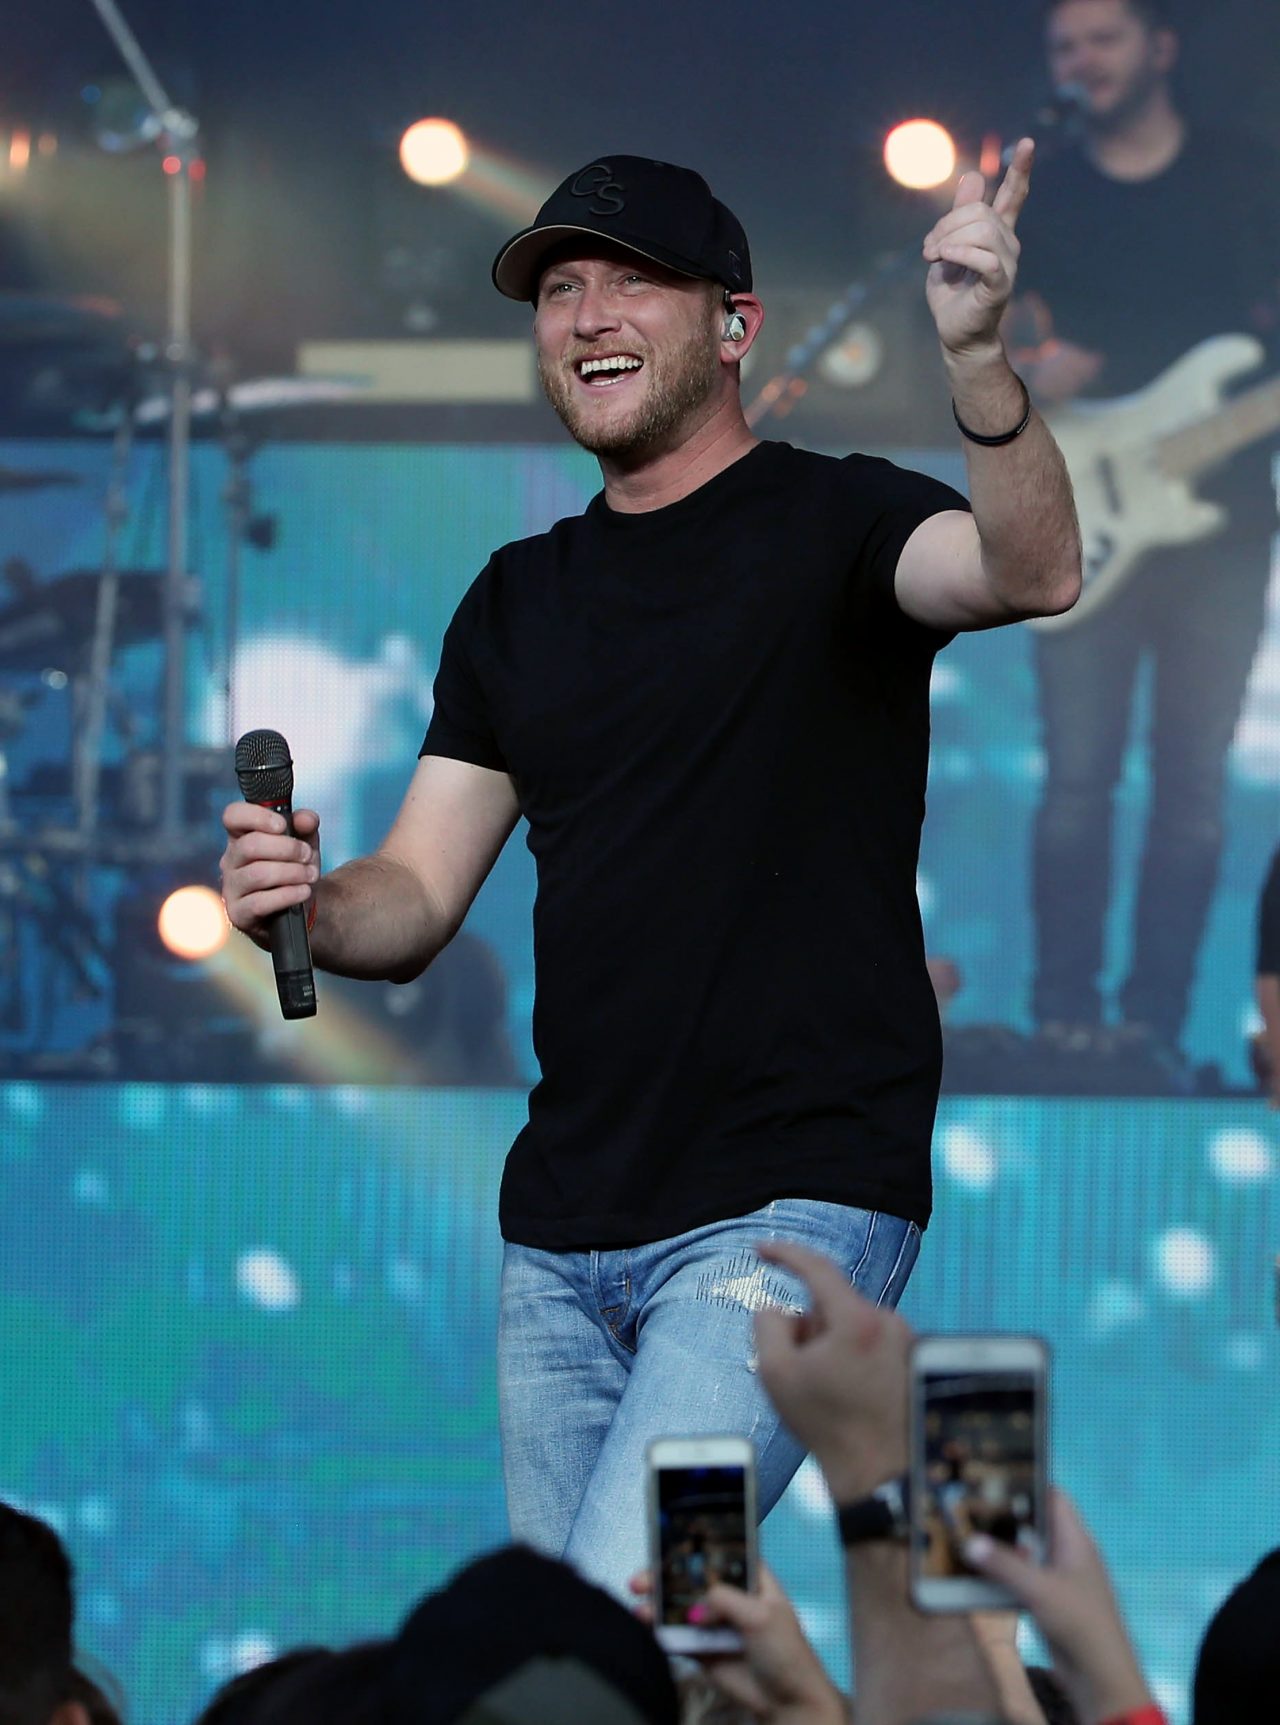 Luke Bryan With Cole Swindell And Jon Langston In Concert – Wantagh, NY